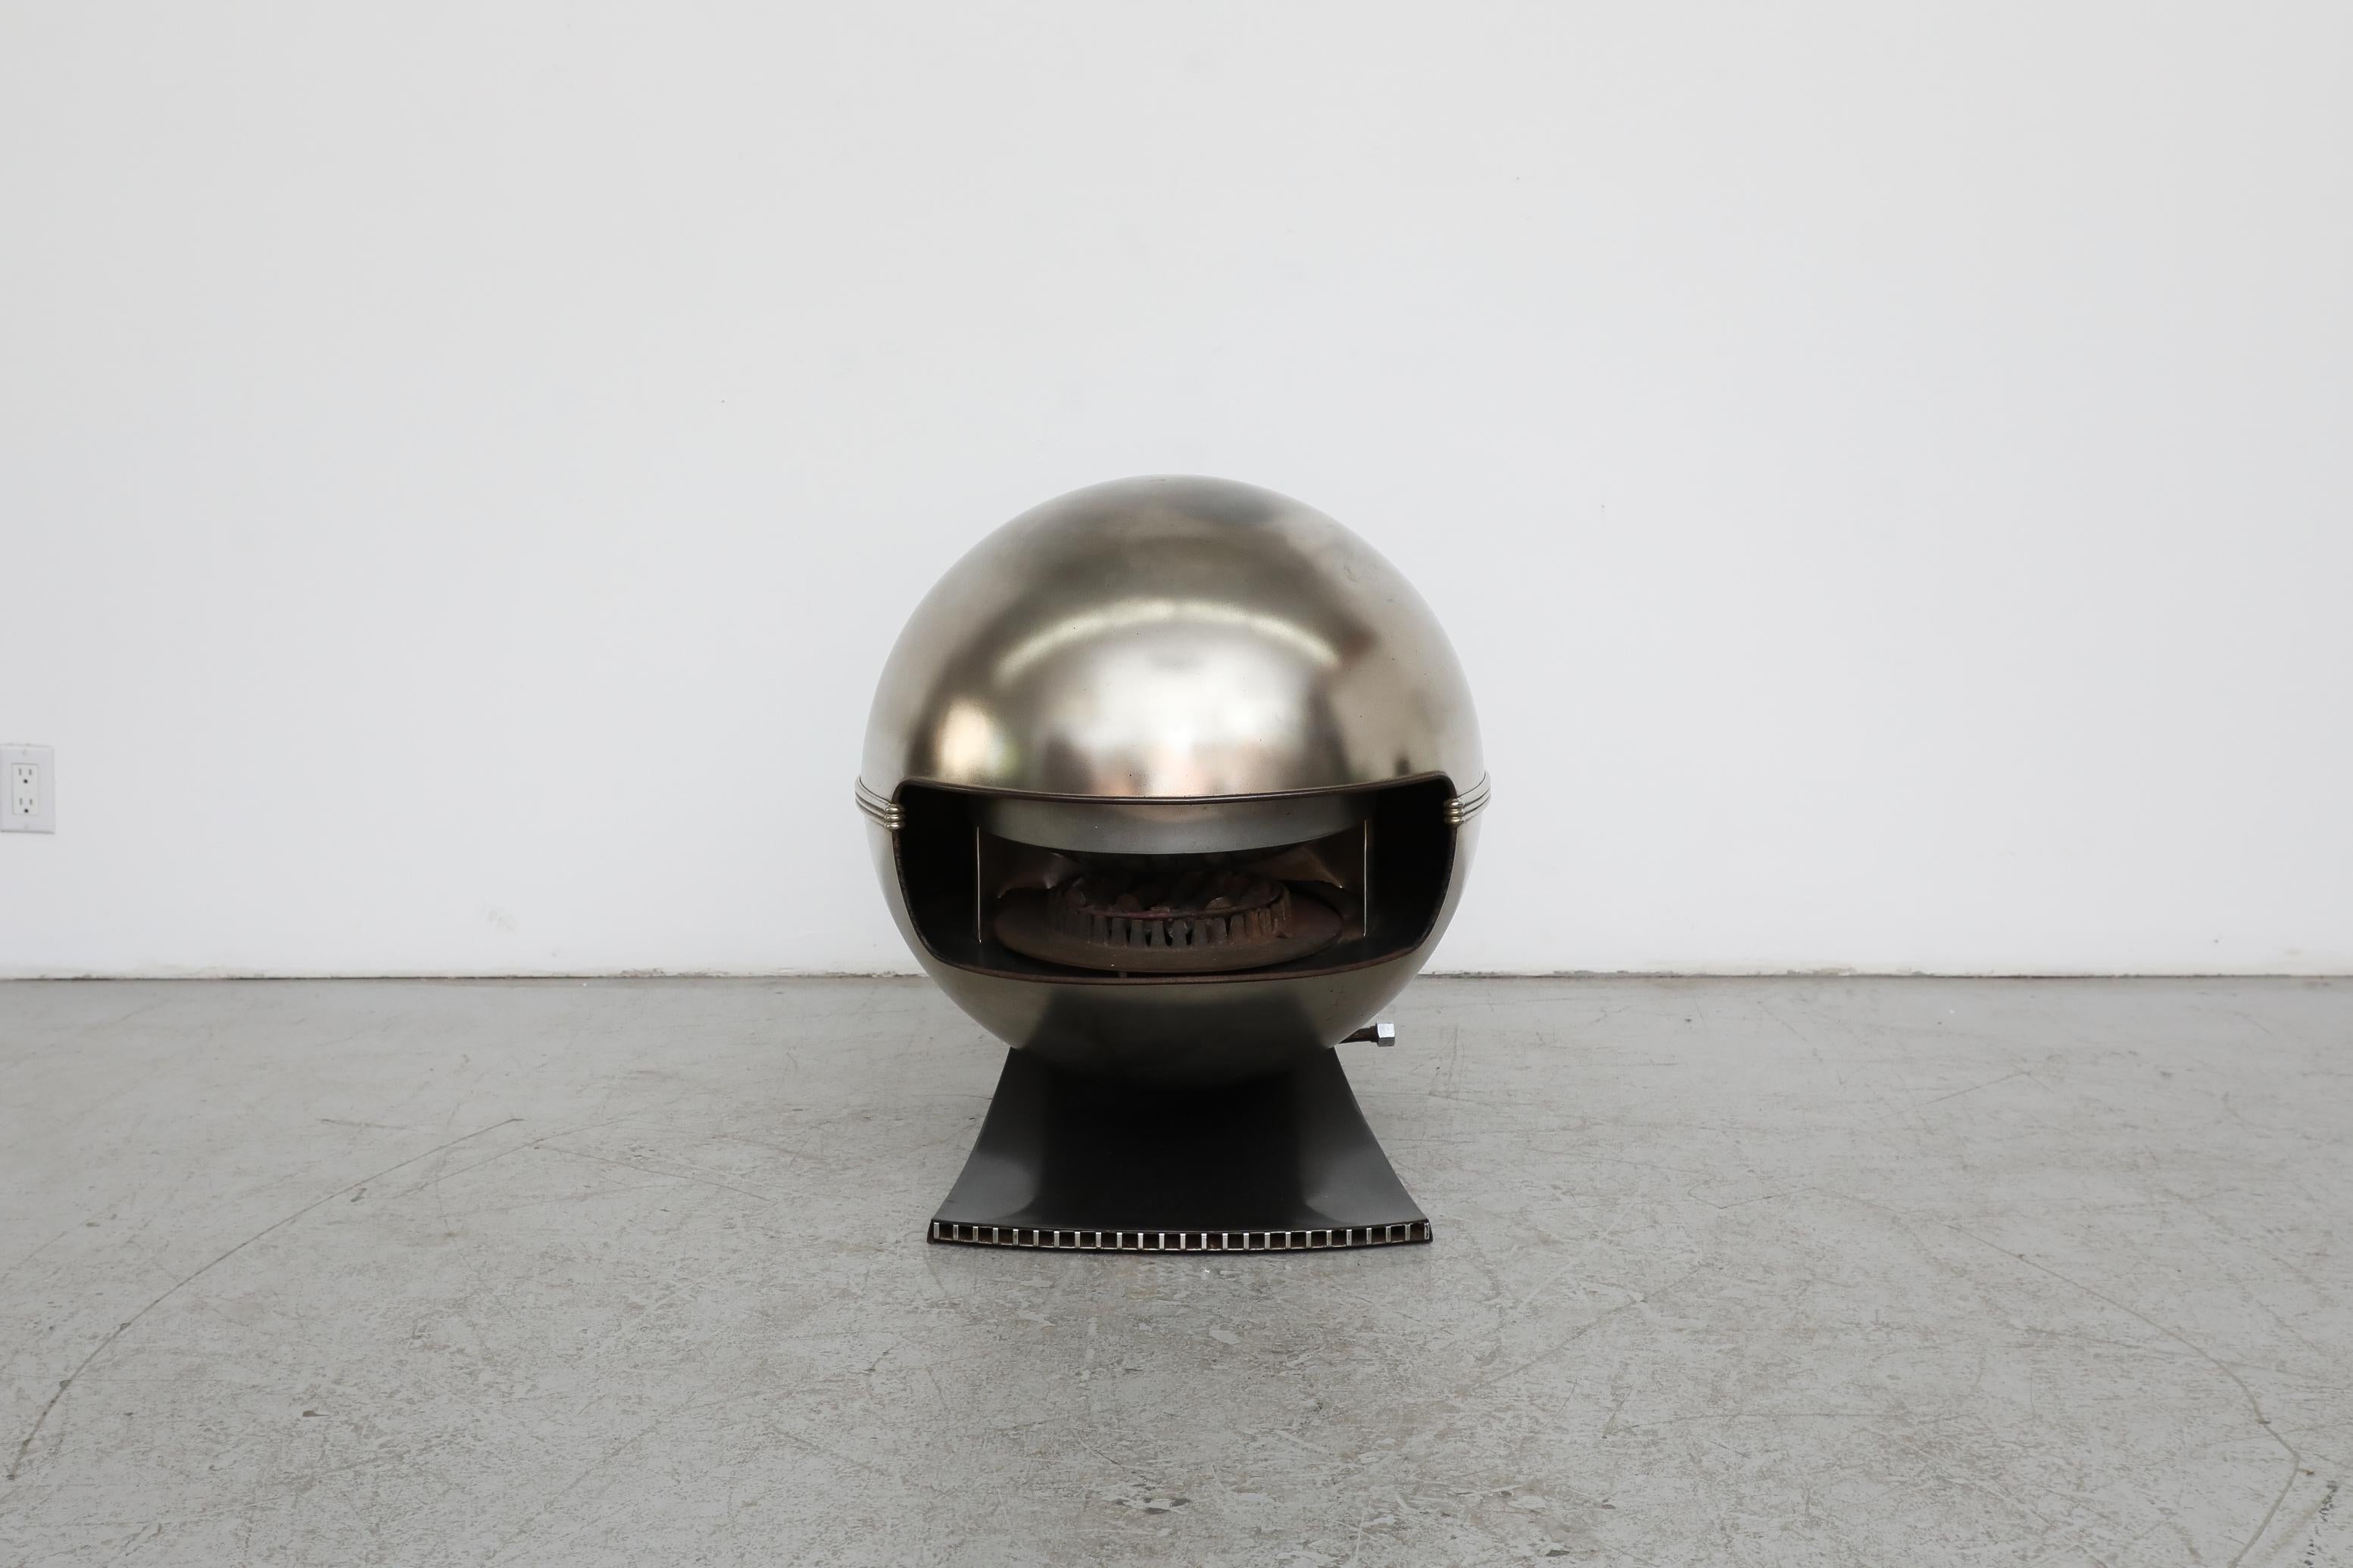 A Model '2000' gas stove in steel, a strikingly beautiful, mod-century, minimalist space age design by Richard Wolthekker from 1965. Made by Faber in The Netherlands. The spherical form of the design, which was created with practicality and not just